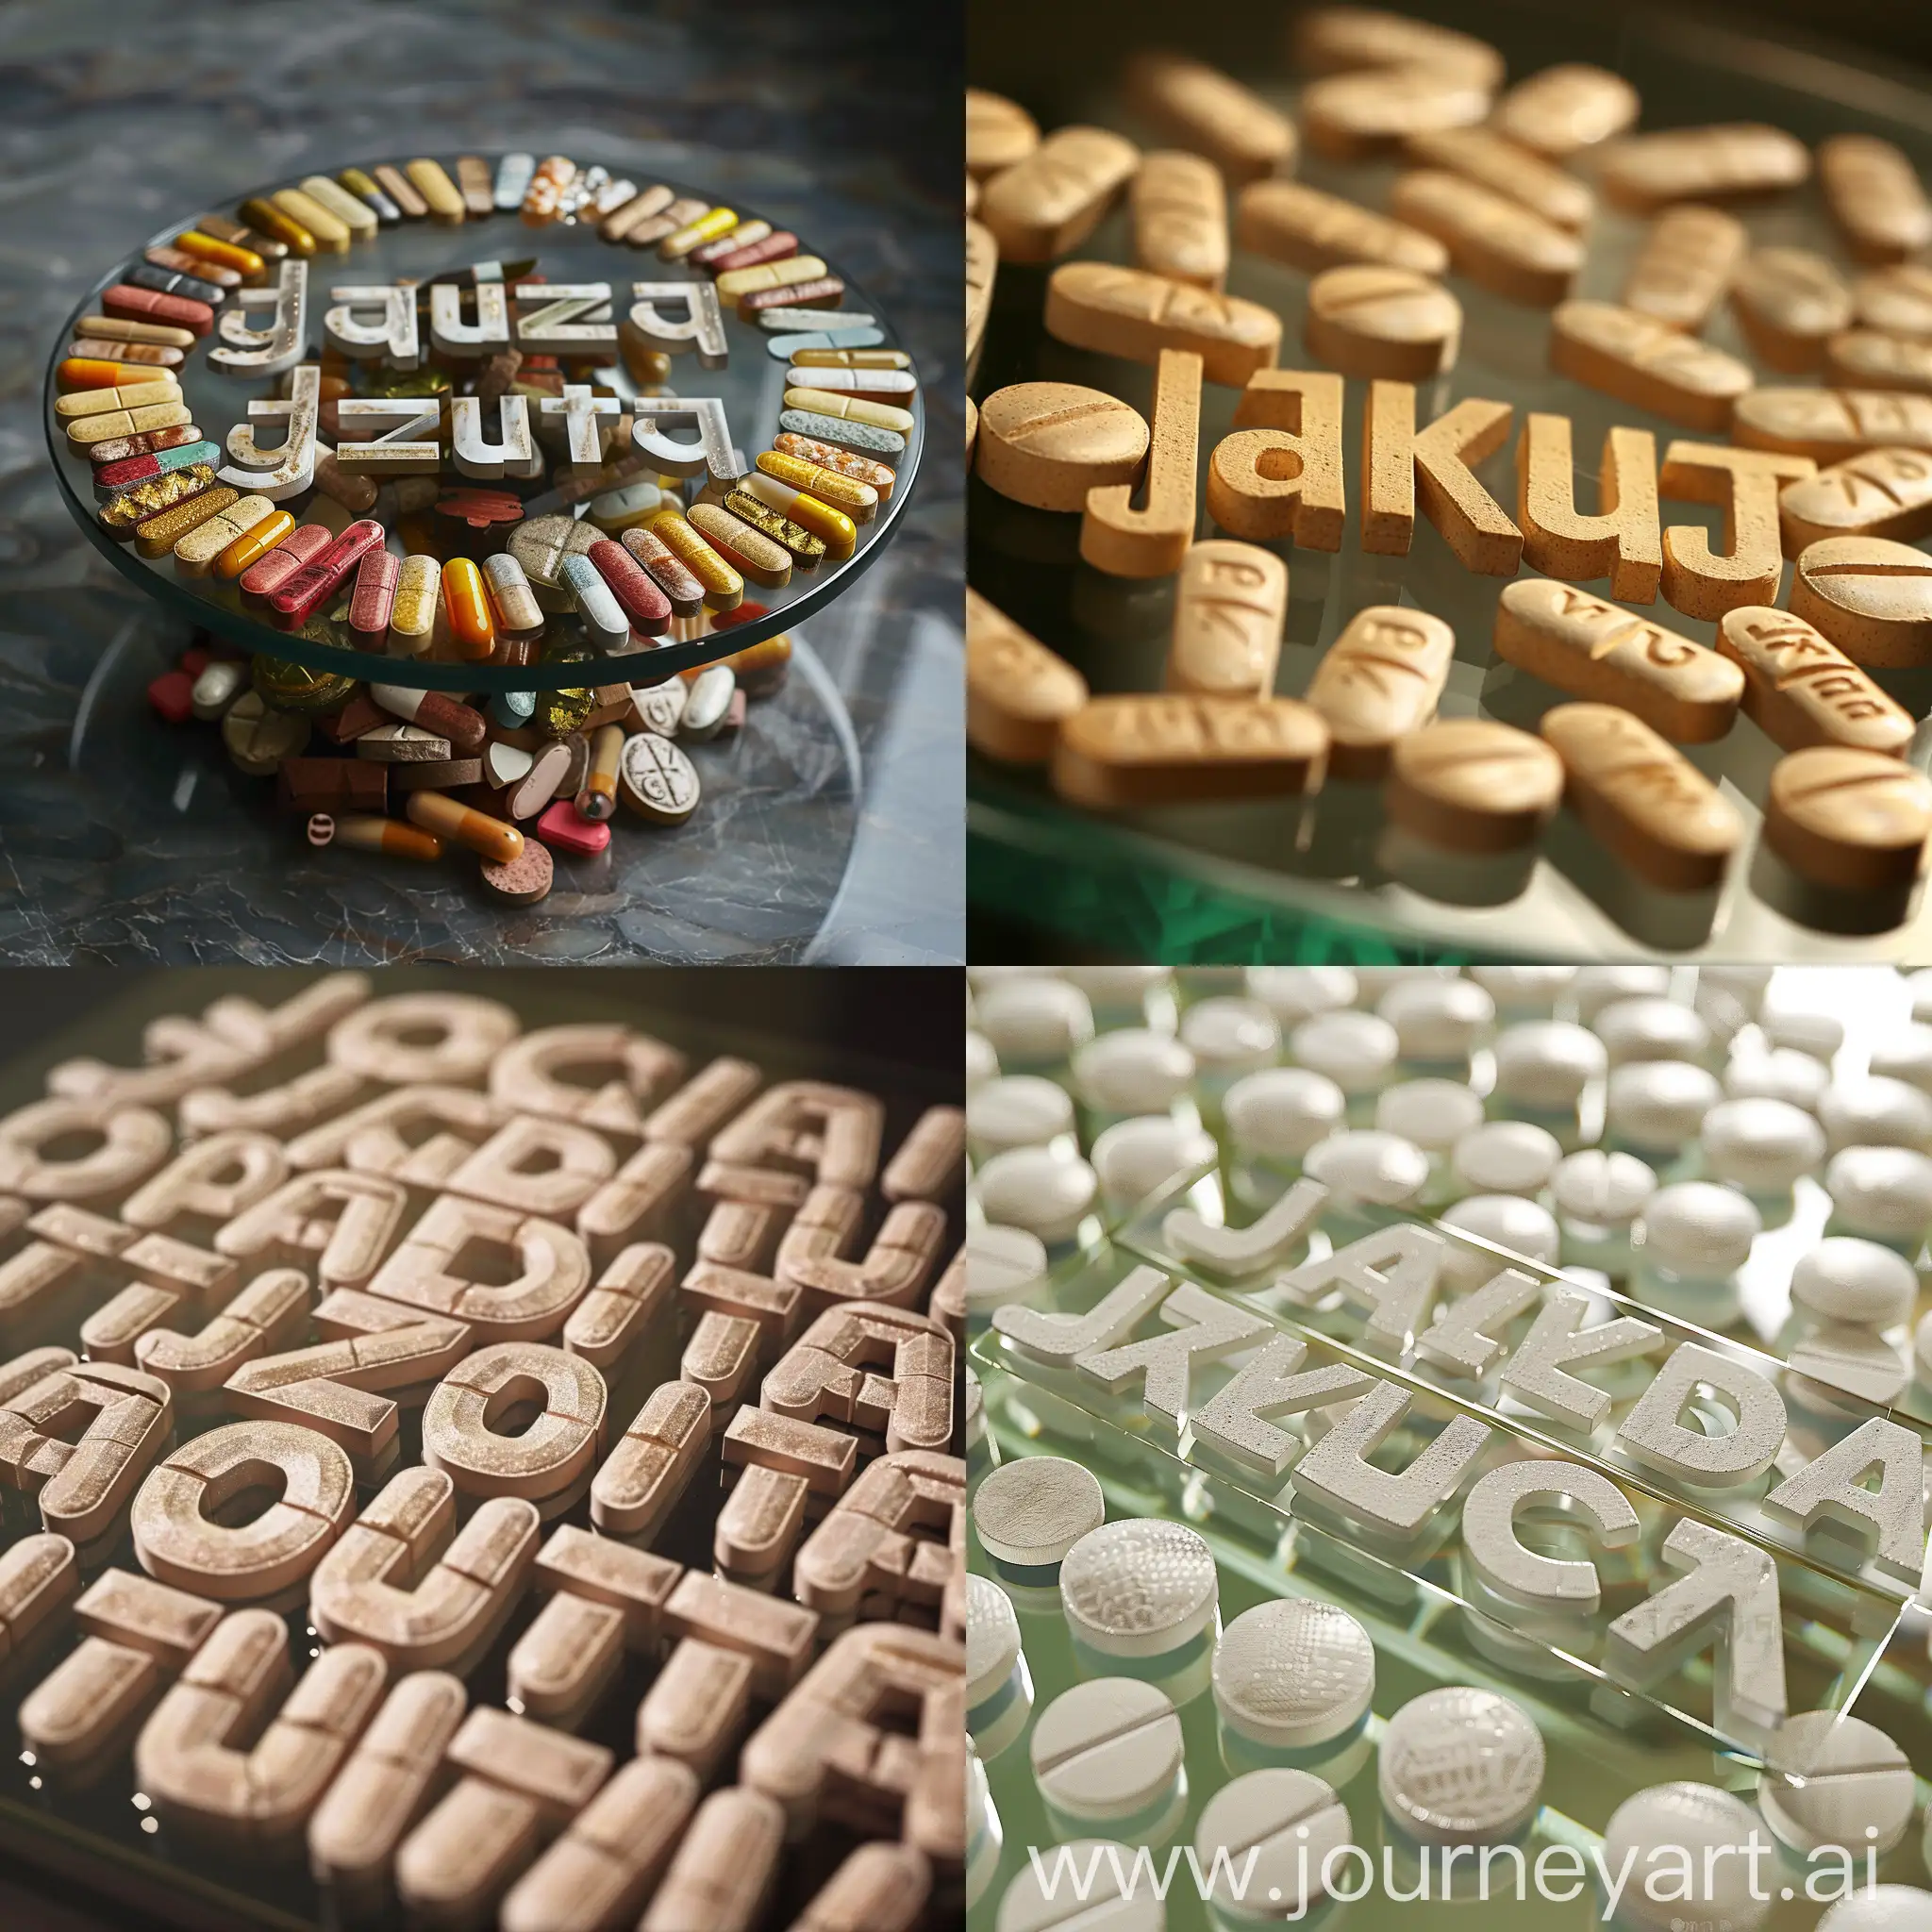 The word jakuta was laid out on a glass table made of tablets